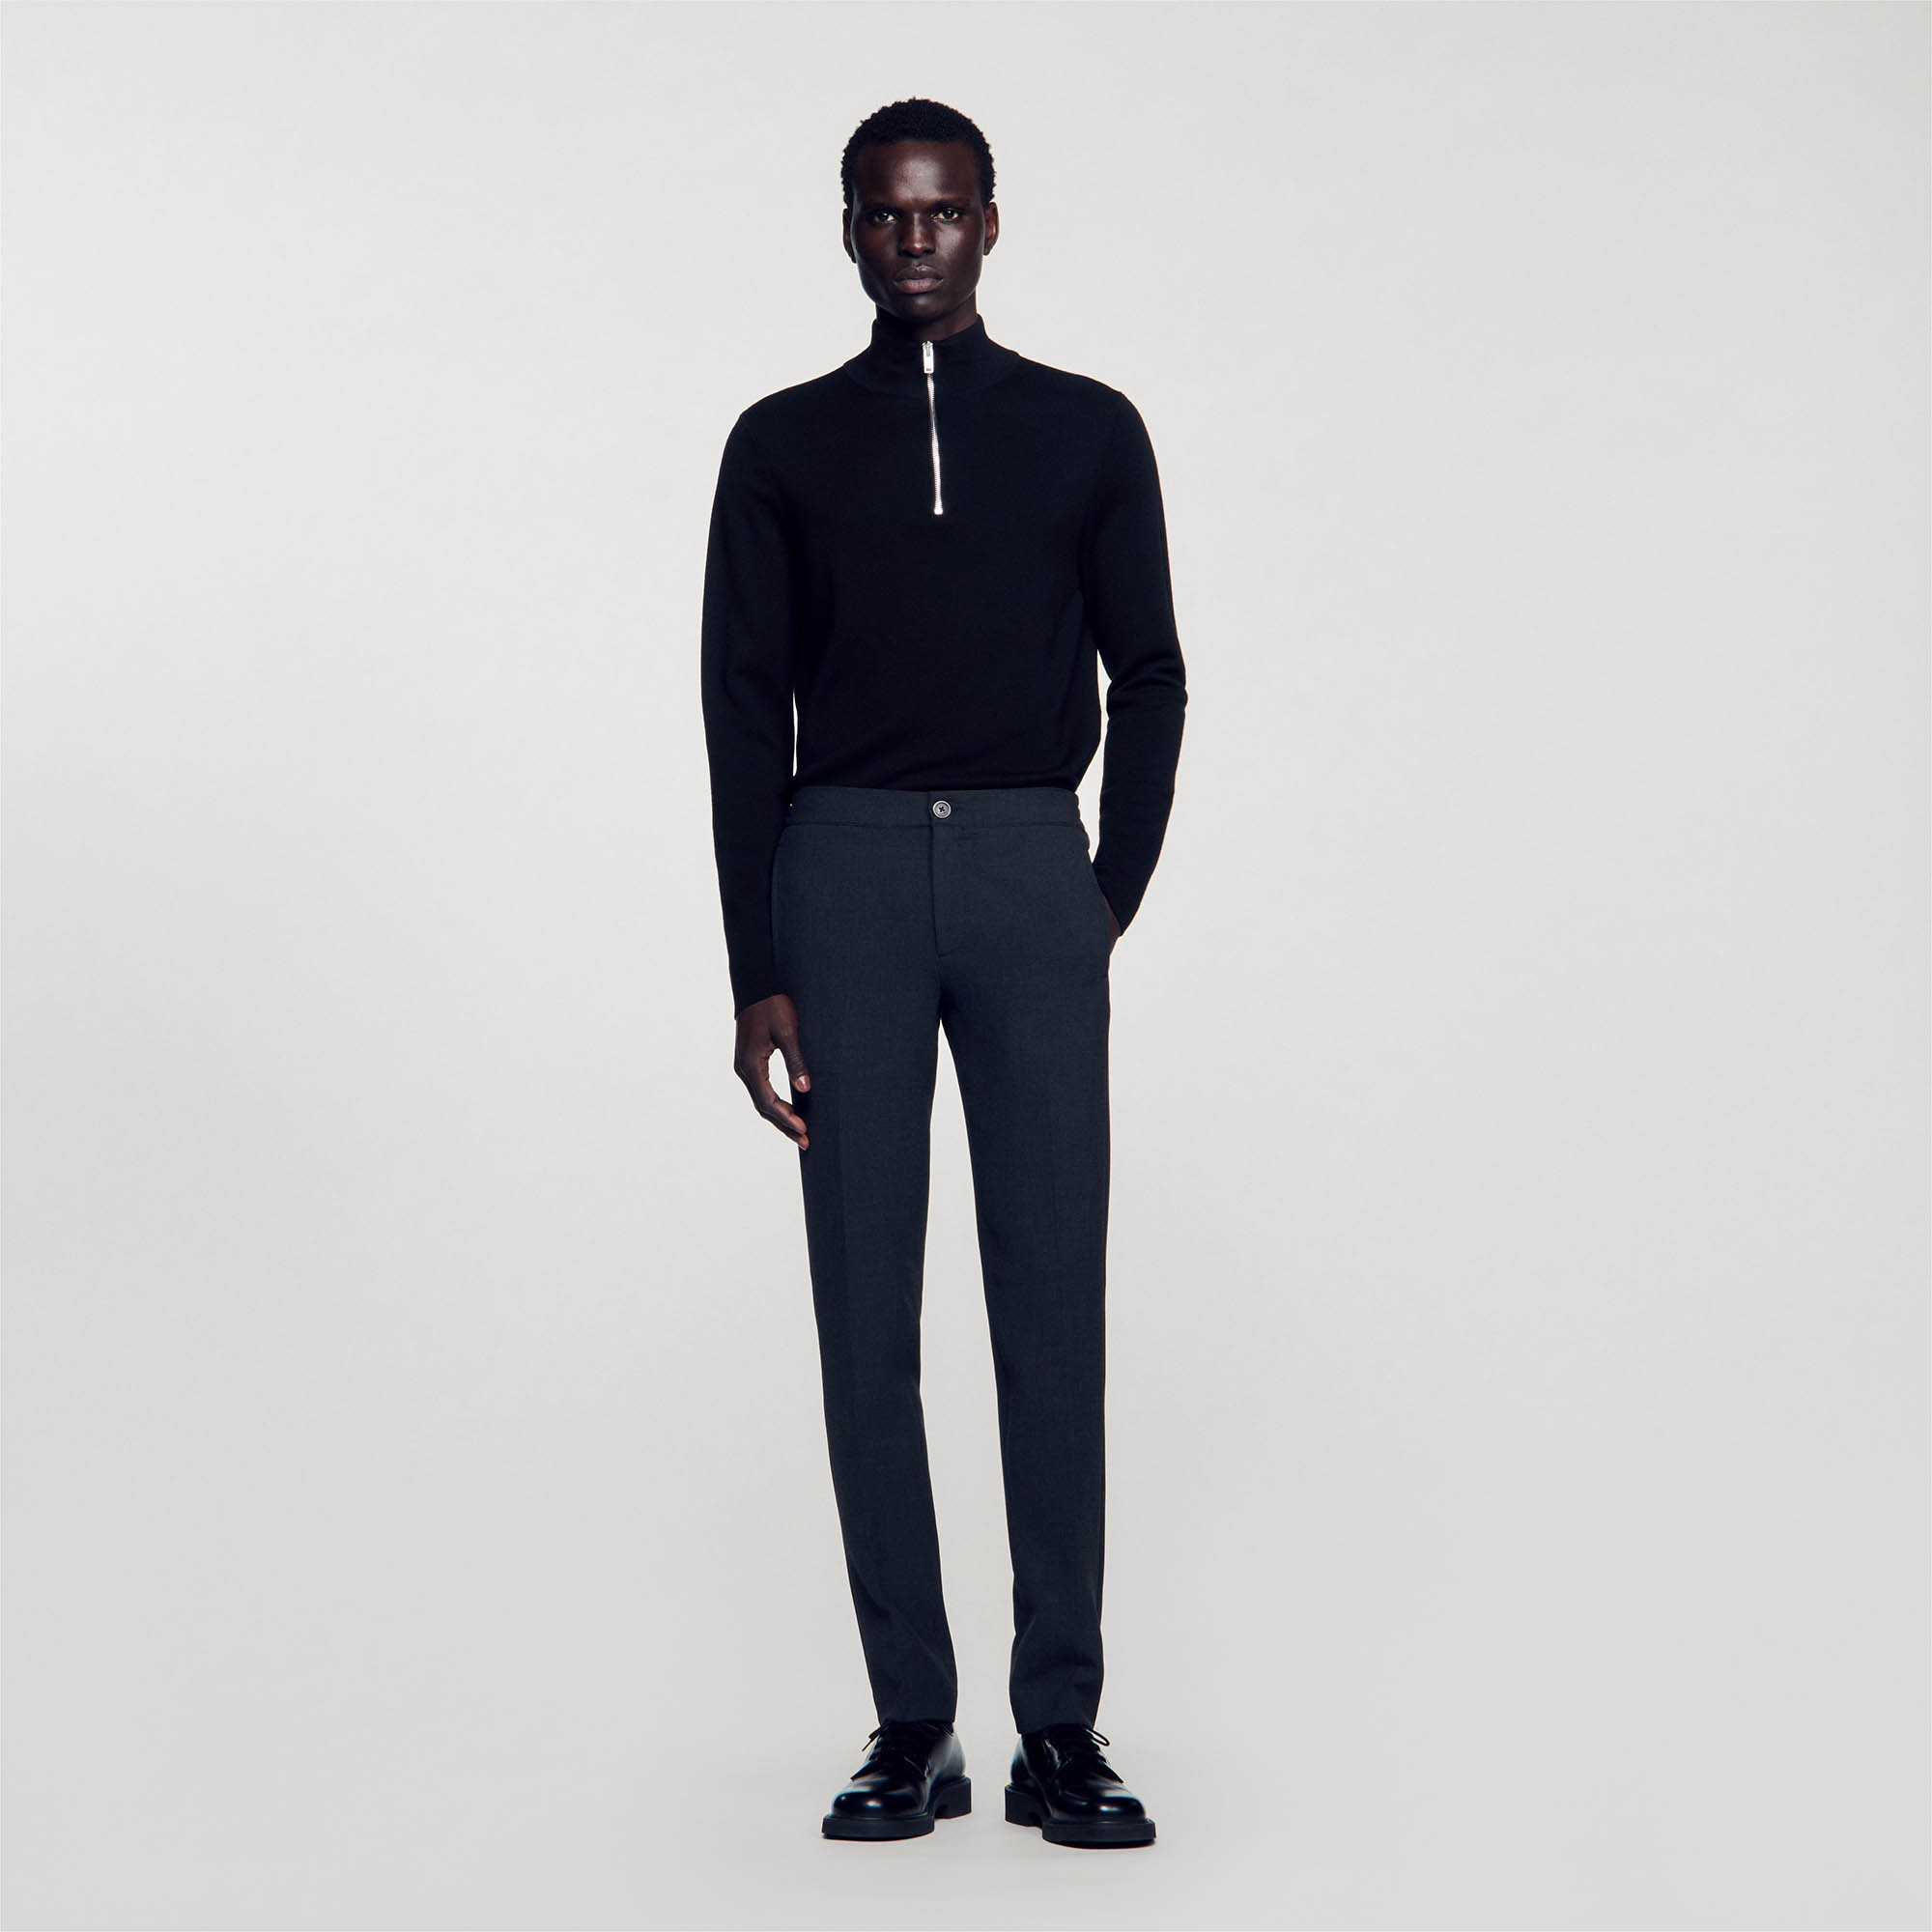 Sandro polyester Sandro men's pants â€¢ Jersey pants â€¢ Button fastening at the front â€¢ Elasticated waist at the back â€¢ Slanted pockets at the front â€¢ Two piped pockets at the back â€¢ The model is wearing a size 38